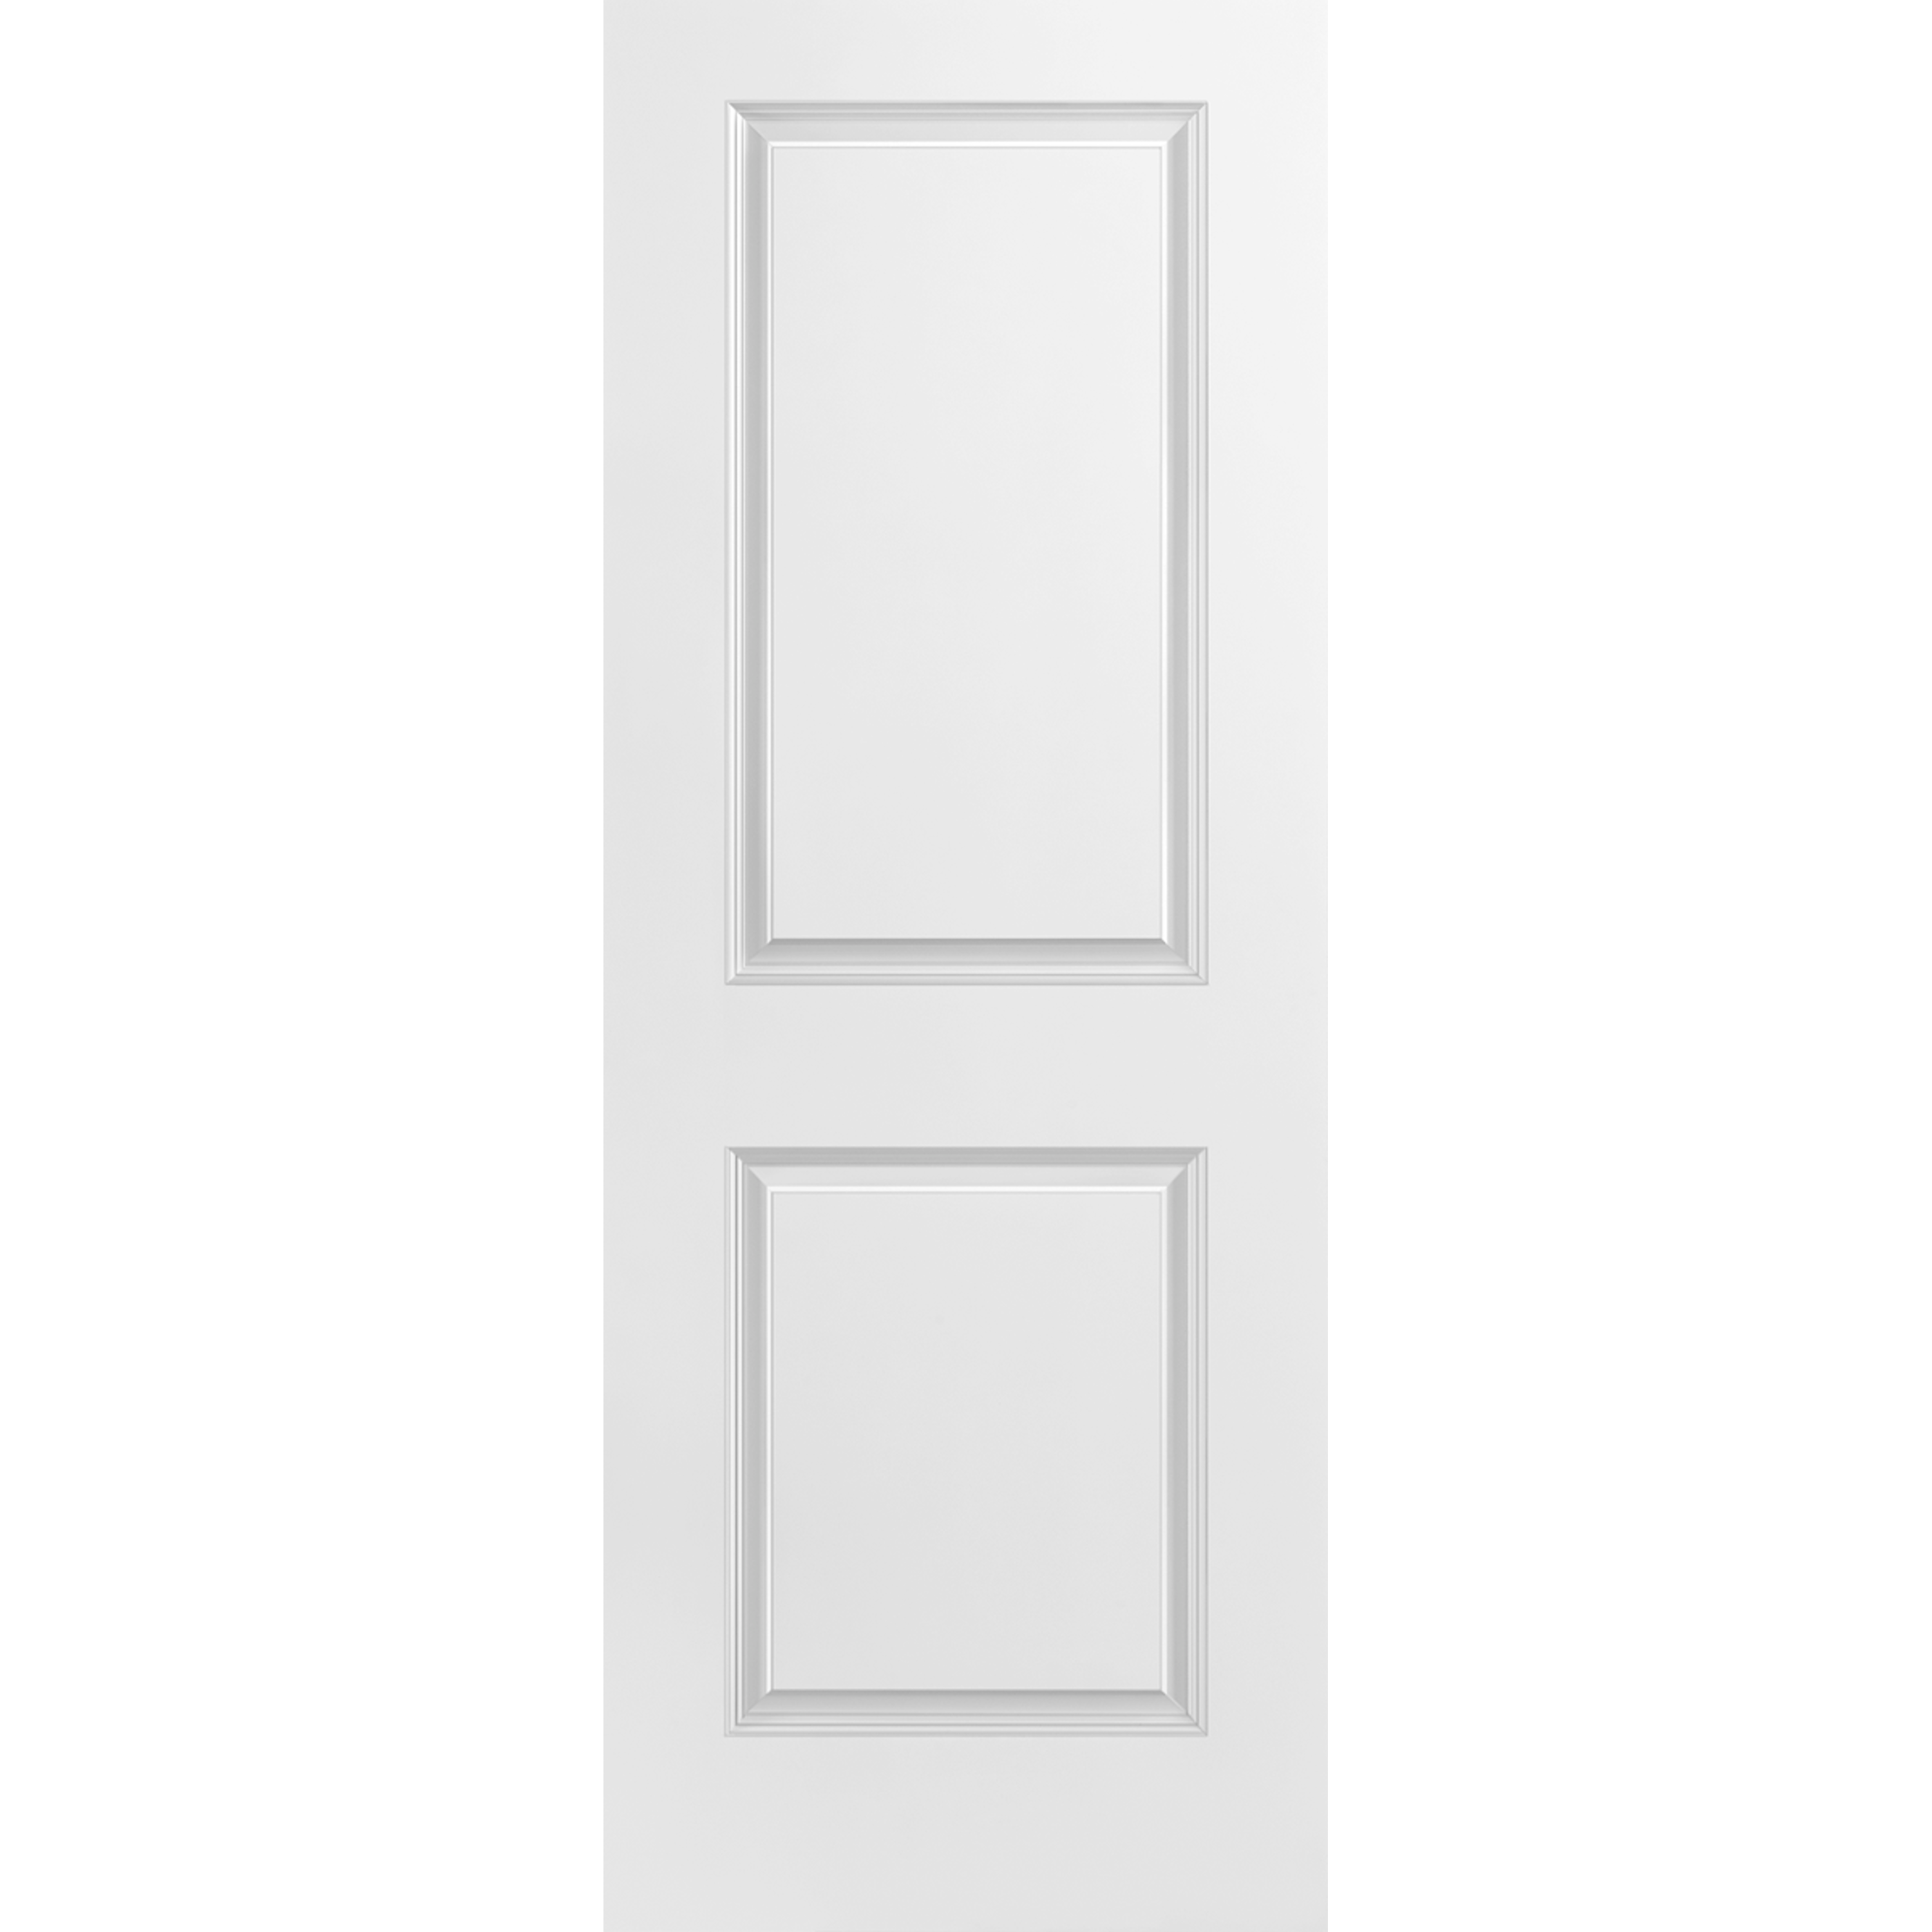 32x80 2 Panel Square Smooth Moulded Fast Fit Door with 4-5/8" PFJ Jamb